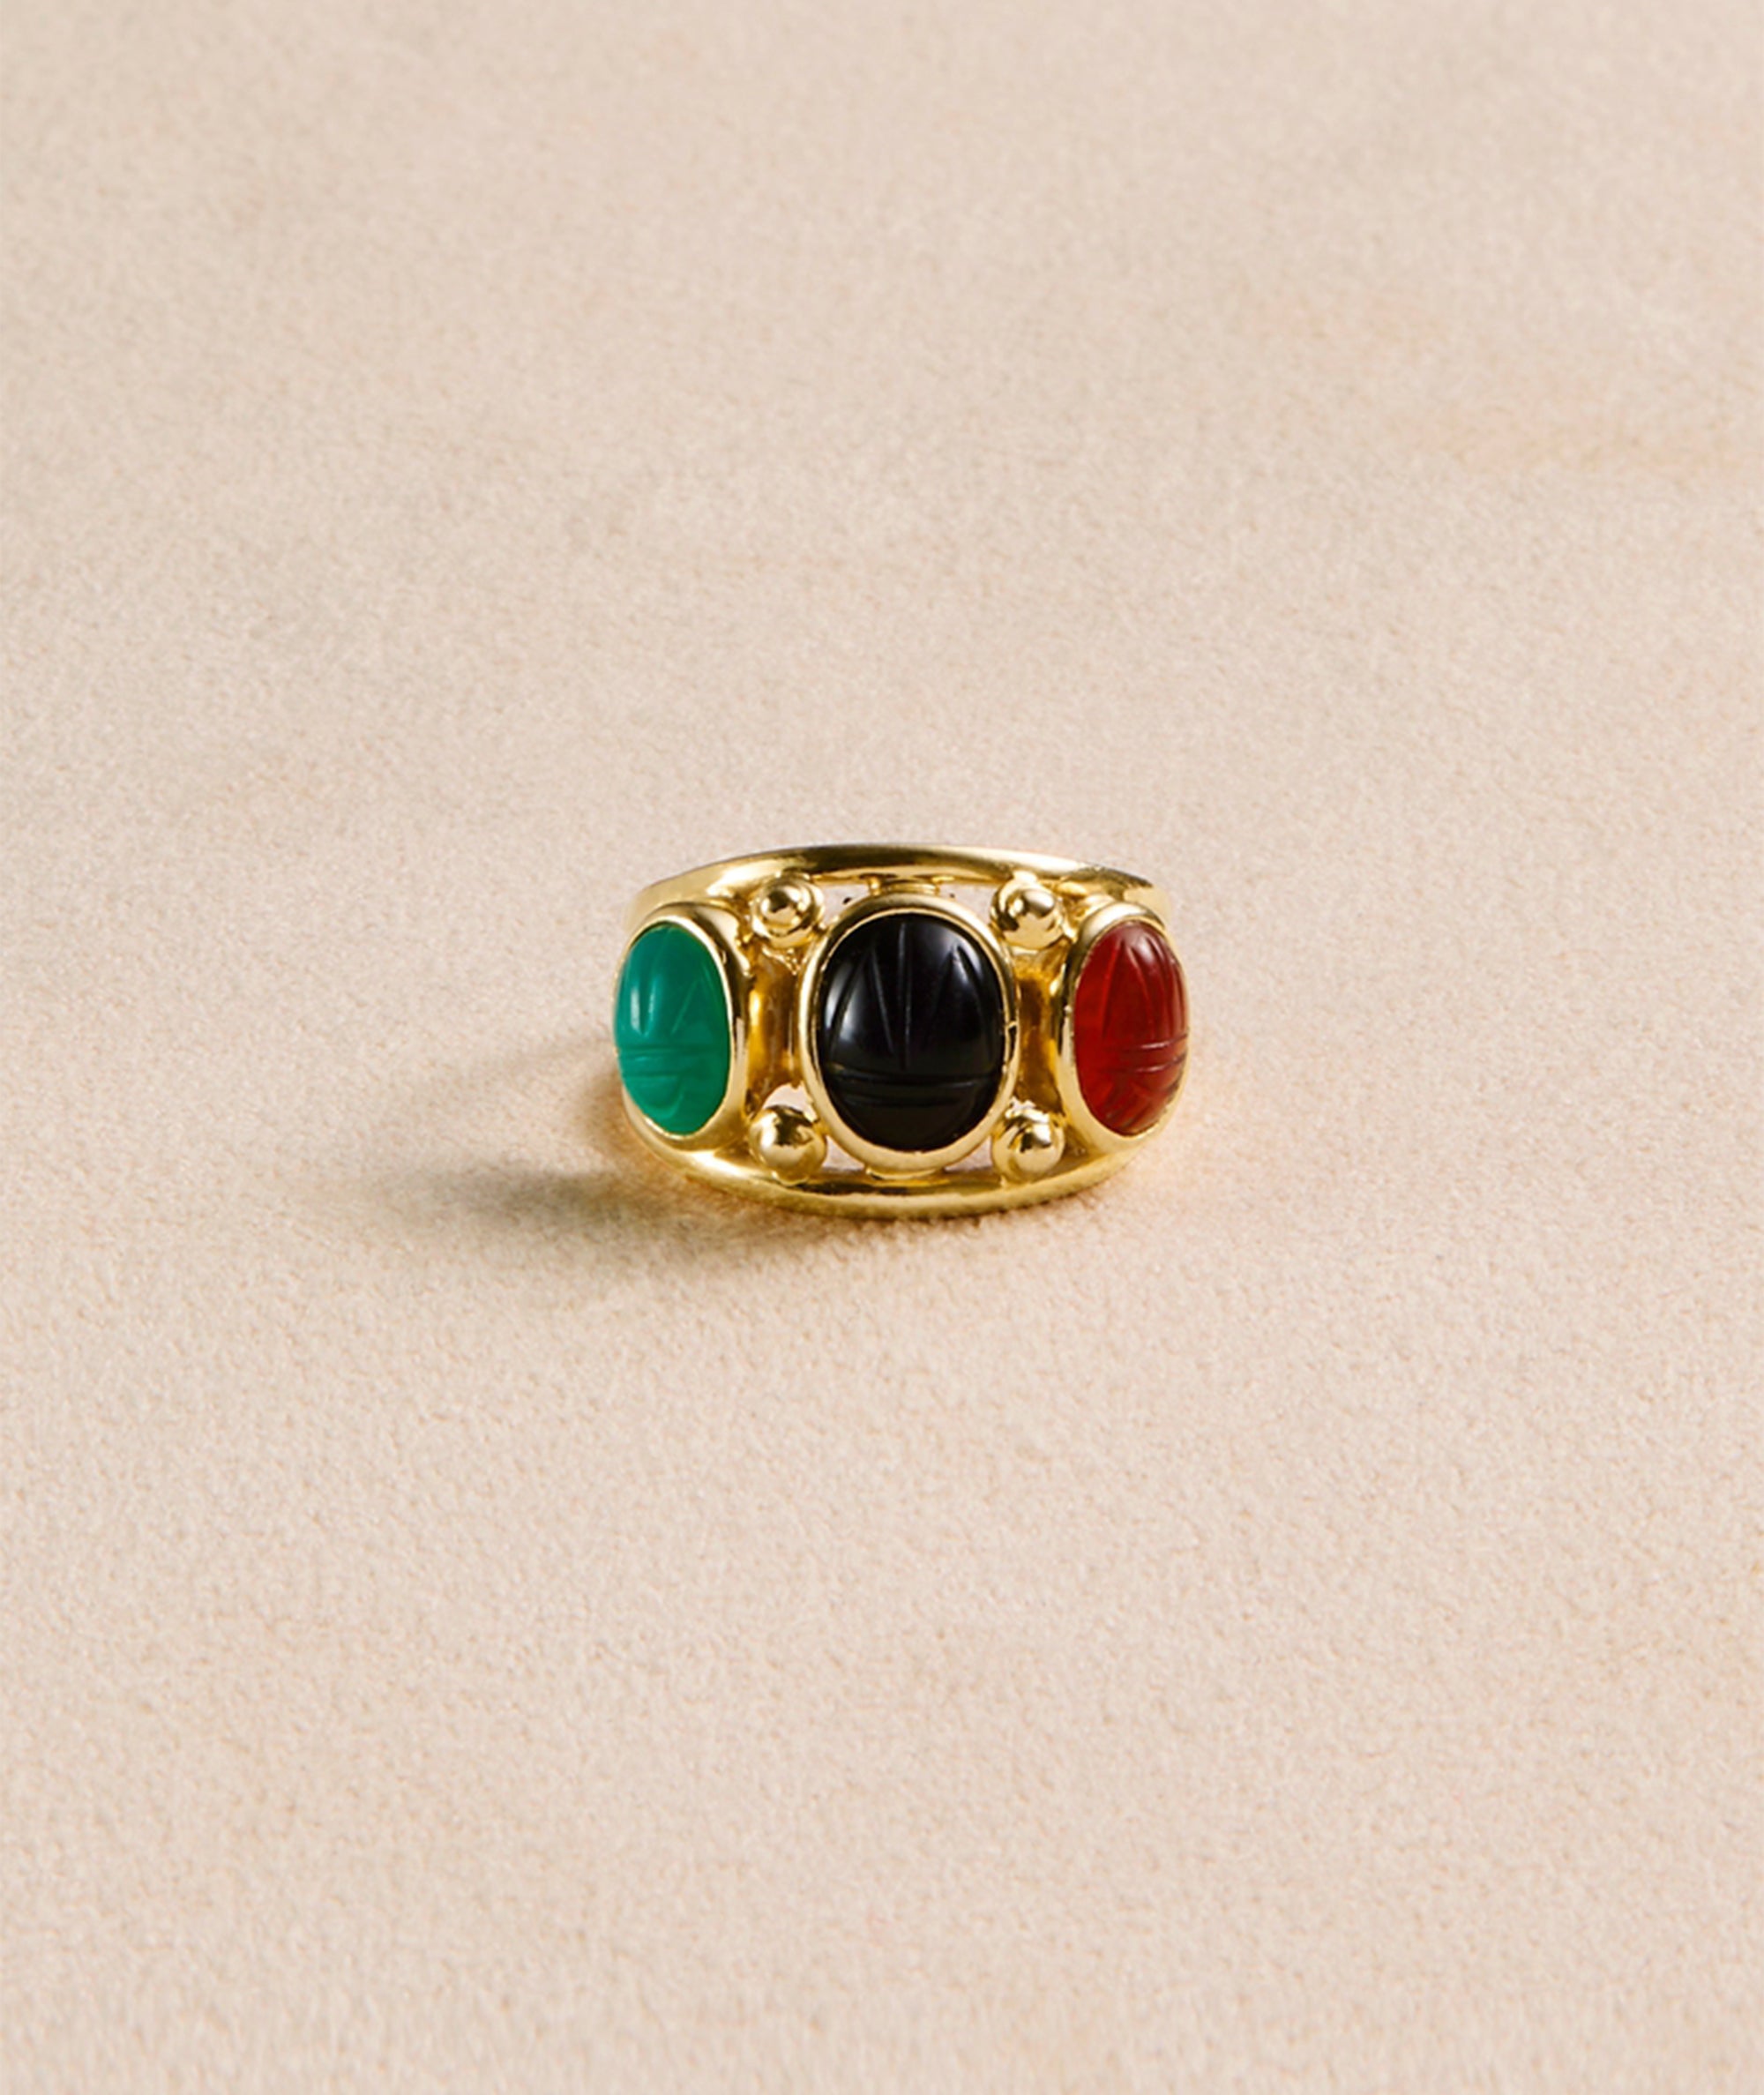 Vintage ring in yellow gold. Exclusively sourced for EREDE Curated.